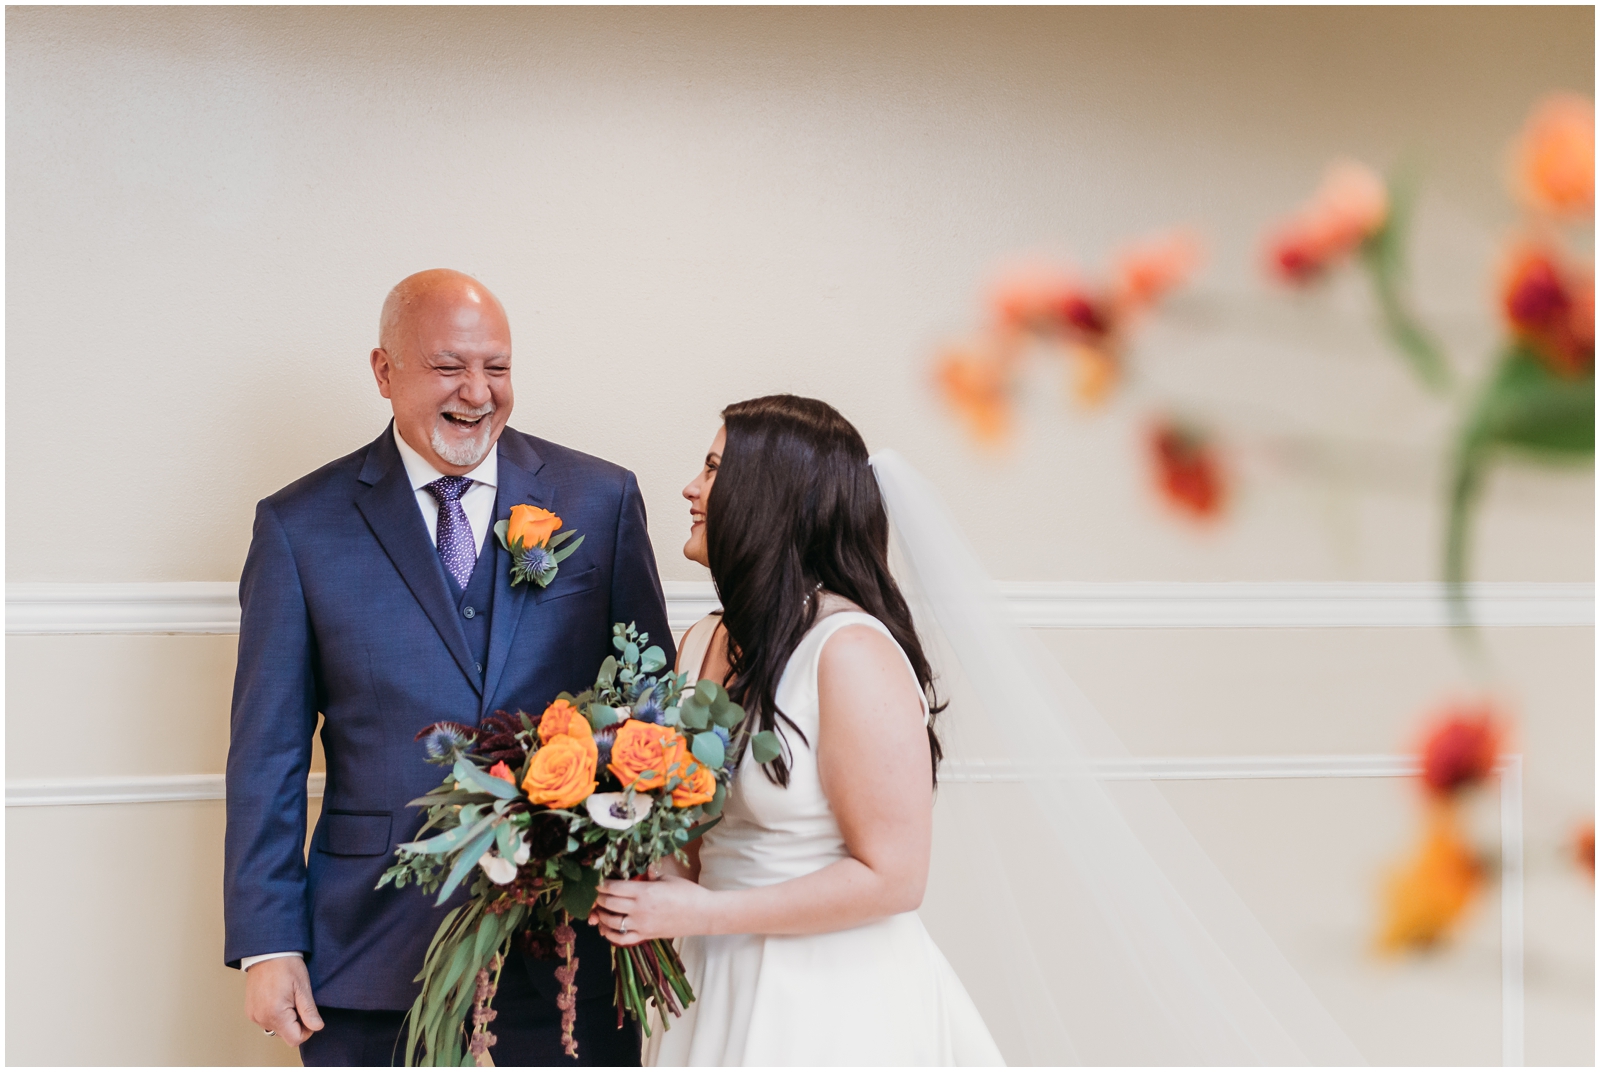 Indoor Ceremony at Avon Oaks Country Club